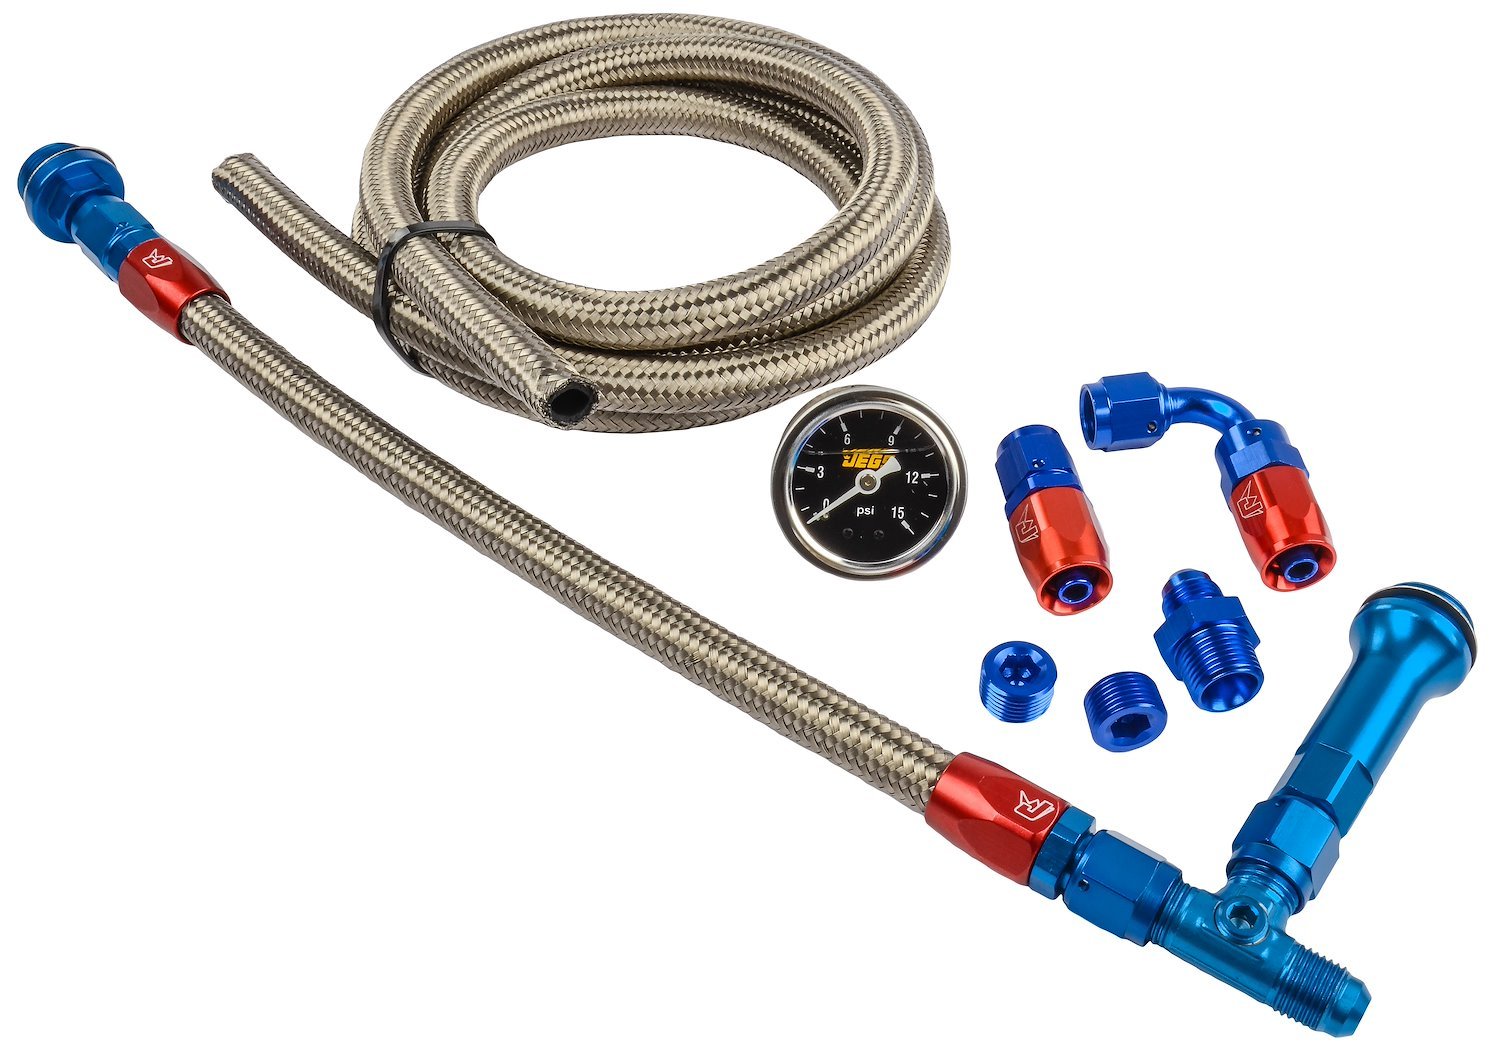 JEGS 100824 Dual Feed Fuel Line (Fuel Log) Kit for Holley 4150